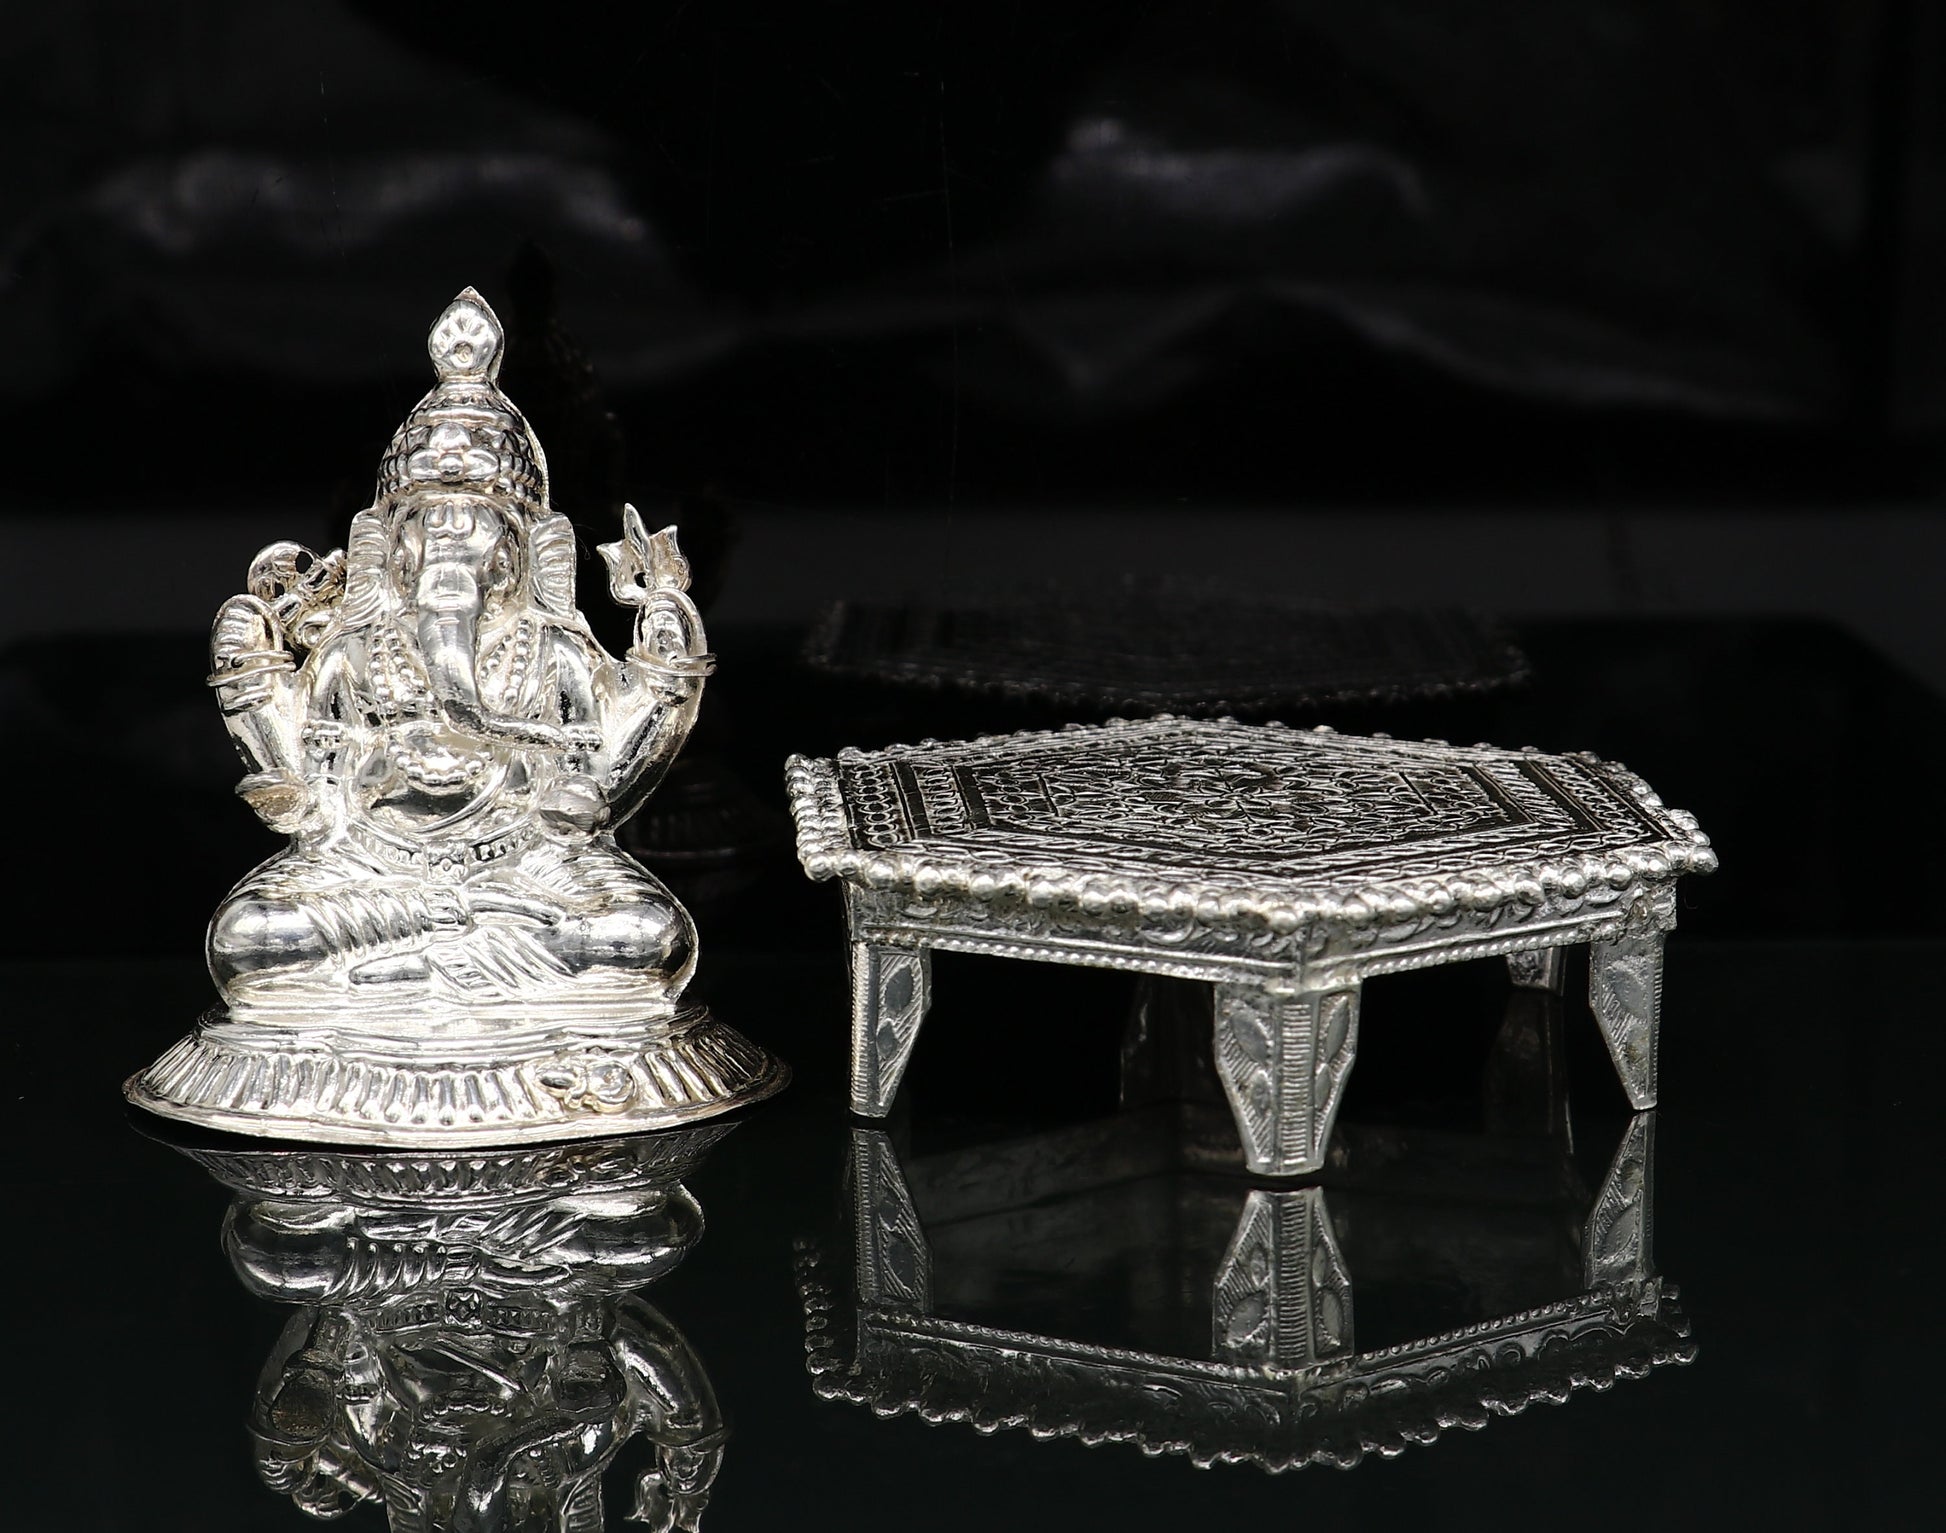 Lord Ganesha With Stand or Bazot, fabulous Sterling silver ganesha statue figurine for home temple diwali puja article utensils su376 - TRIBAL ORNAMENTS